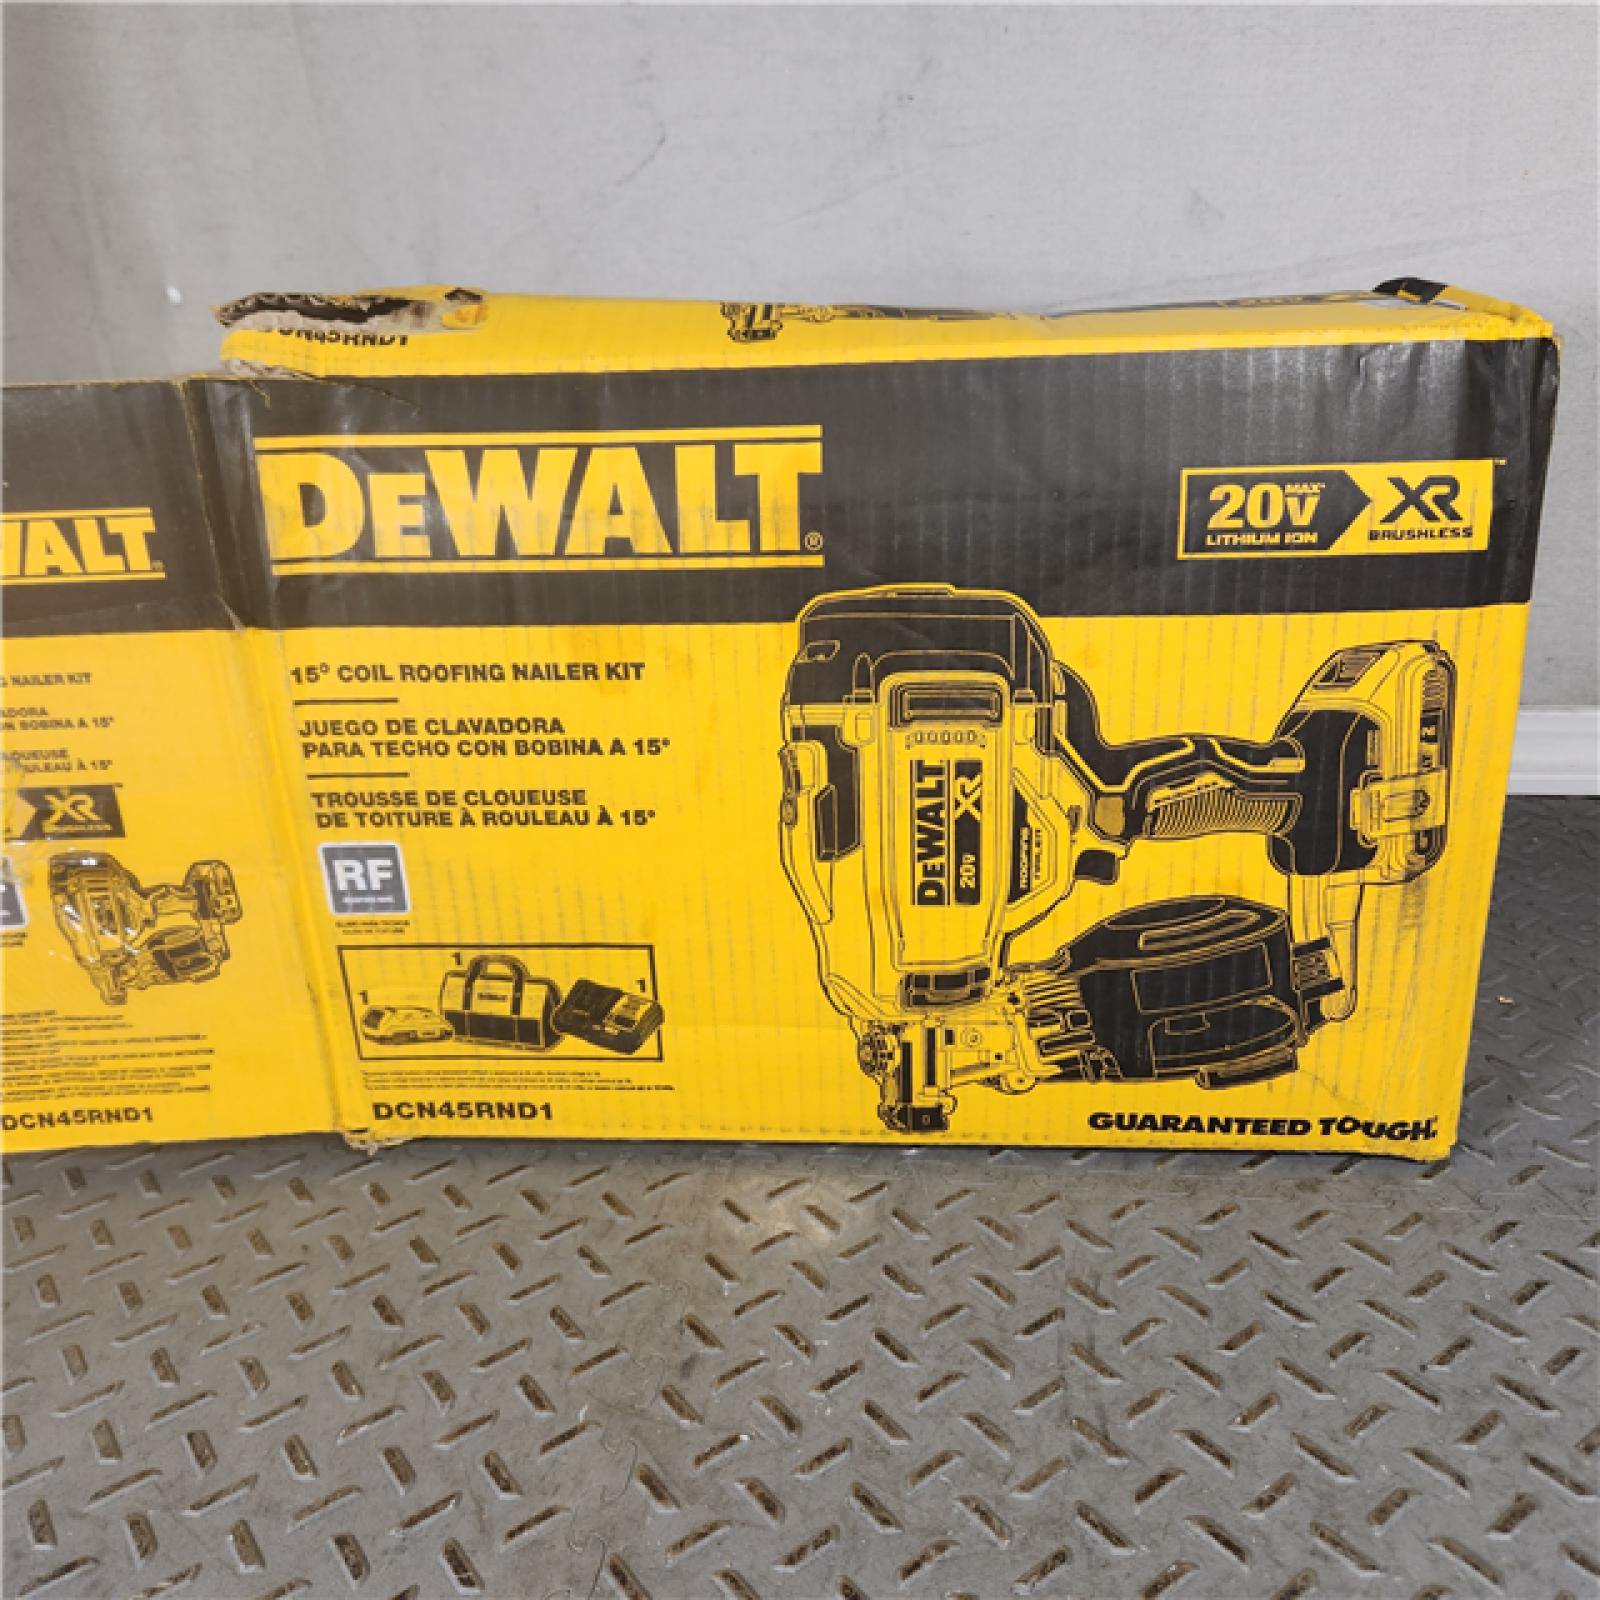 Houston Location - AS-IS Dewalt 20V MAX 15 Cordless Coil Roofing Nailer Kit - Appears IN NEW Condition